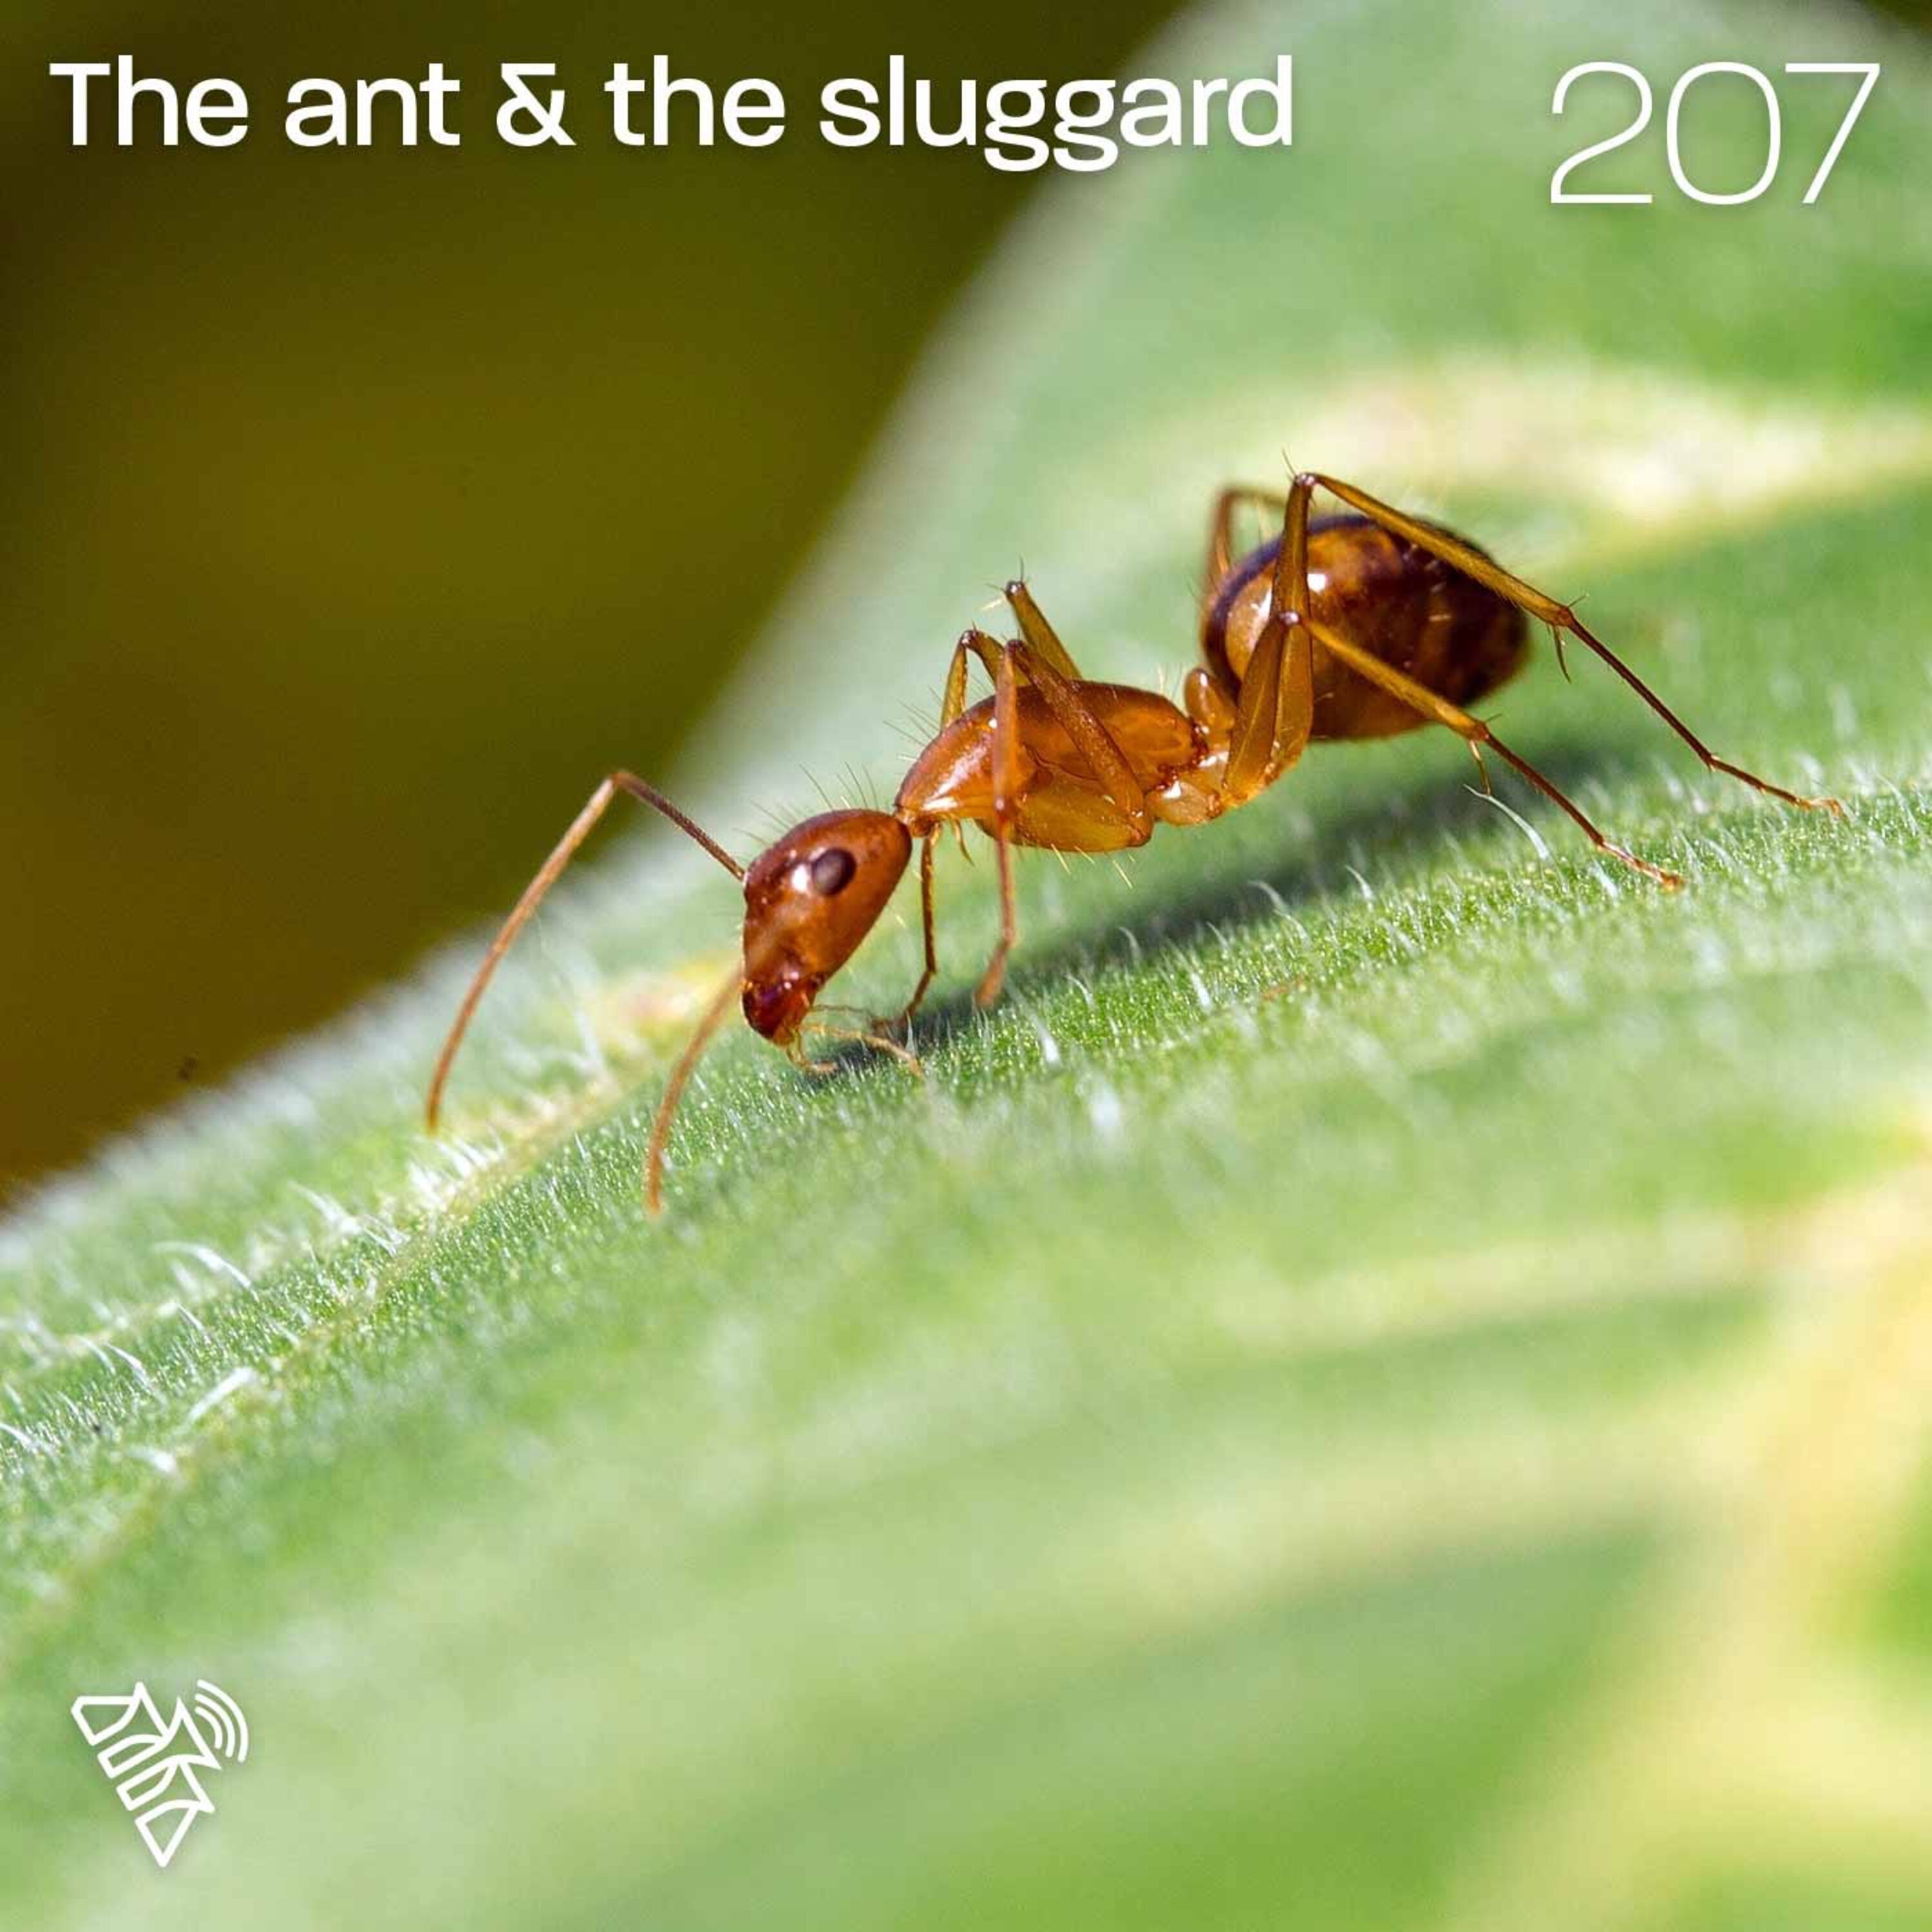 The Ant & the Sluggard - Dave Hawkswood - 207